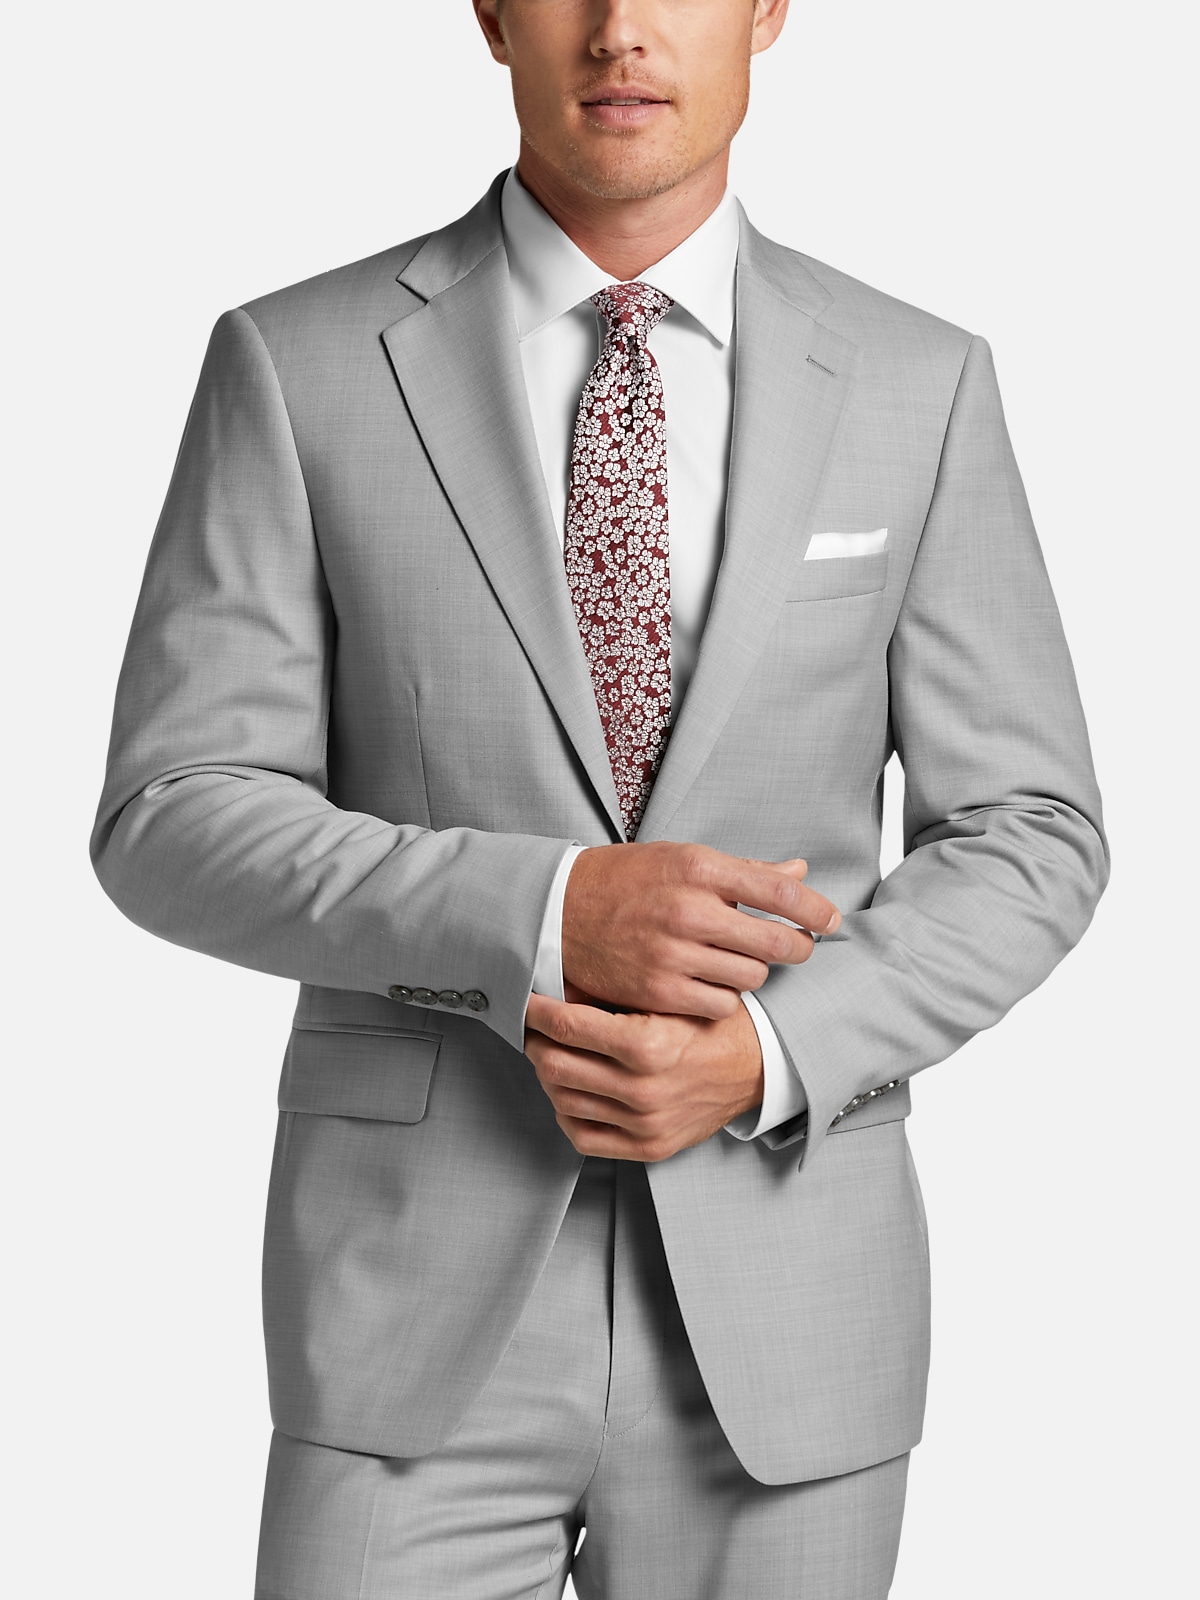 https://image.menswearhouse.com/is/image/TMW/TMW_3VTL_16_CALVIN_KLEIN_SUIT_SEPARATE_JACKETS_LIGHT_GRAY_SHARKSKIN_MAIN?imPolicy=pdp-zoom-mob